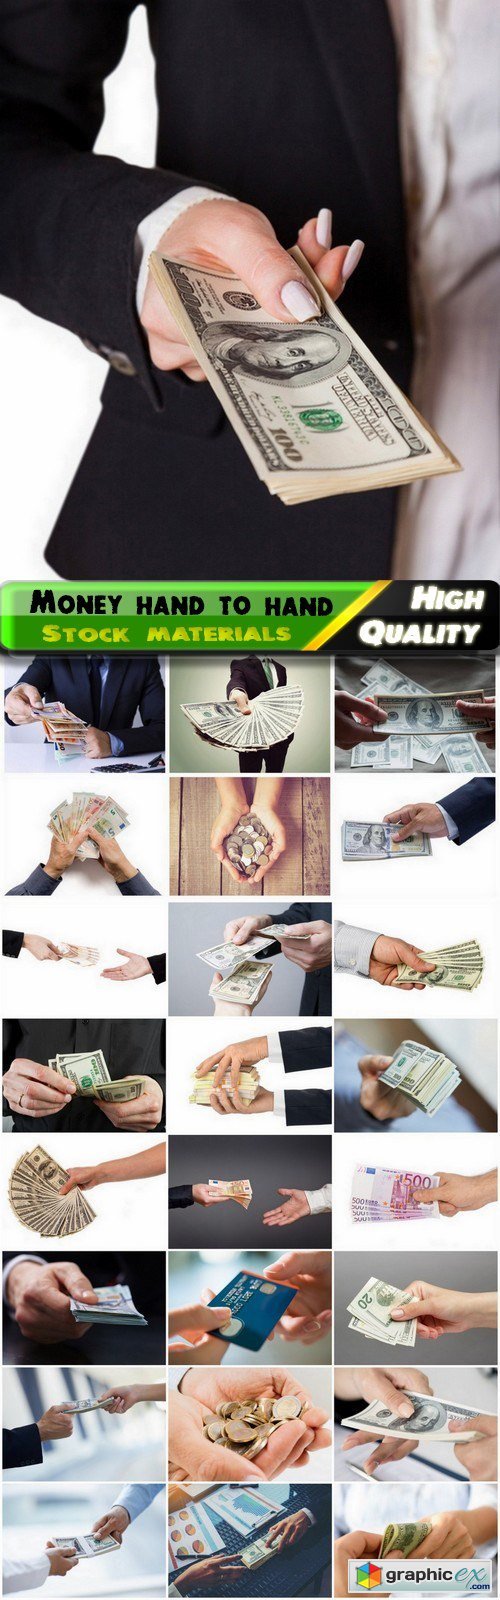 Business concept with money hand to hand - 25 HQ Jpg